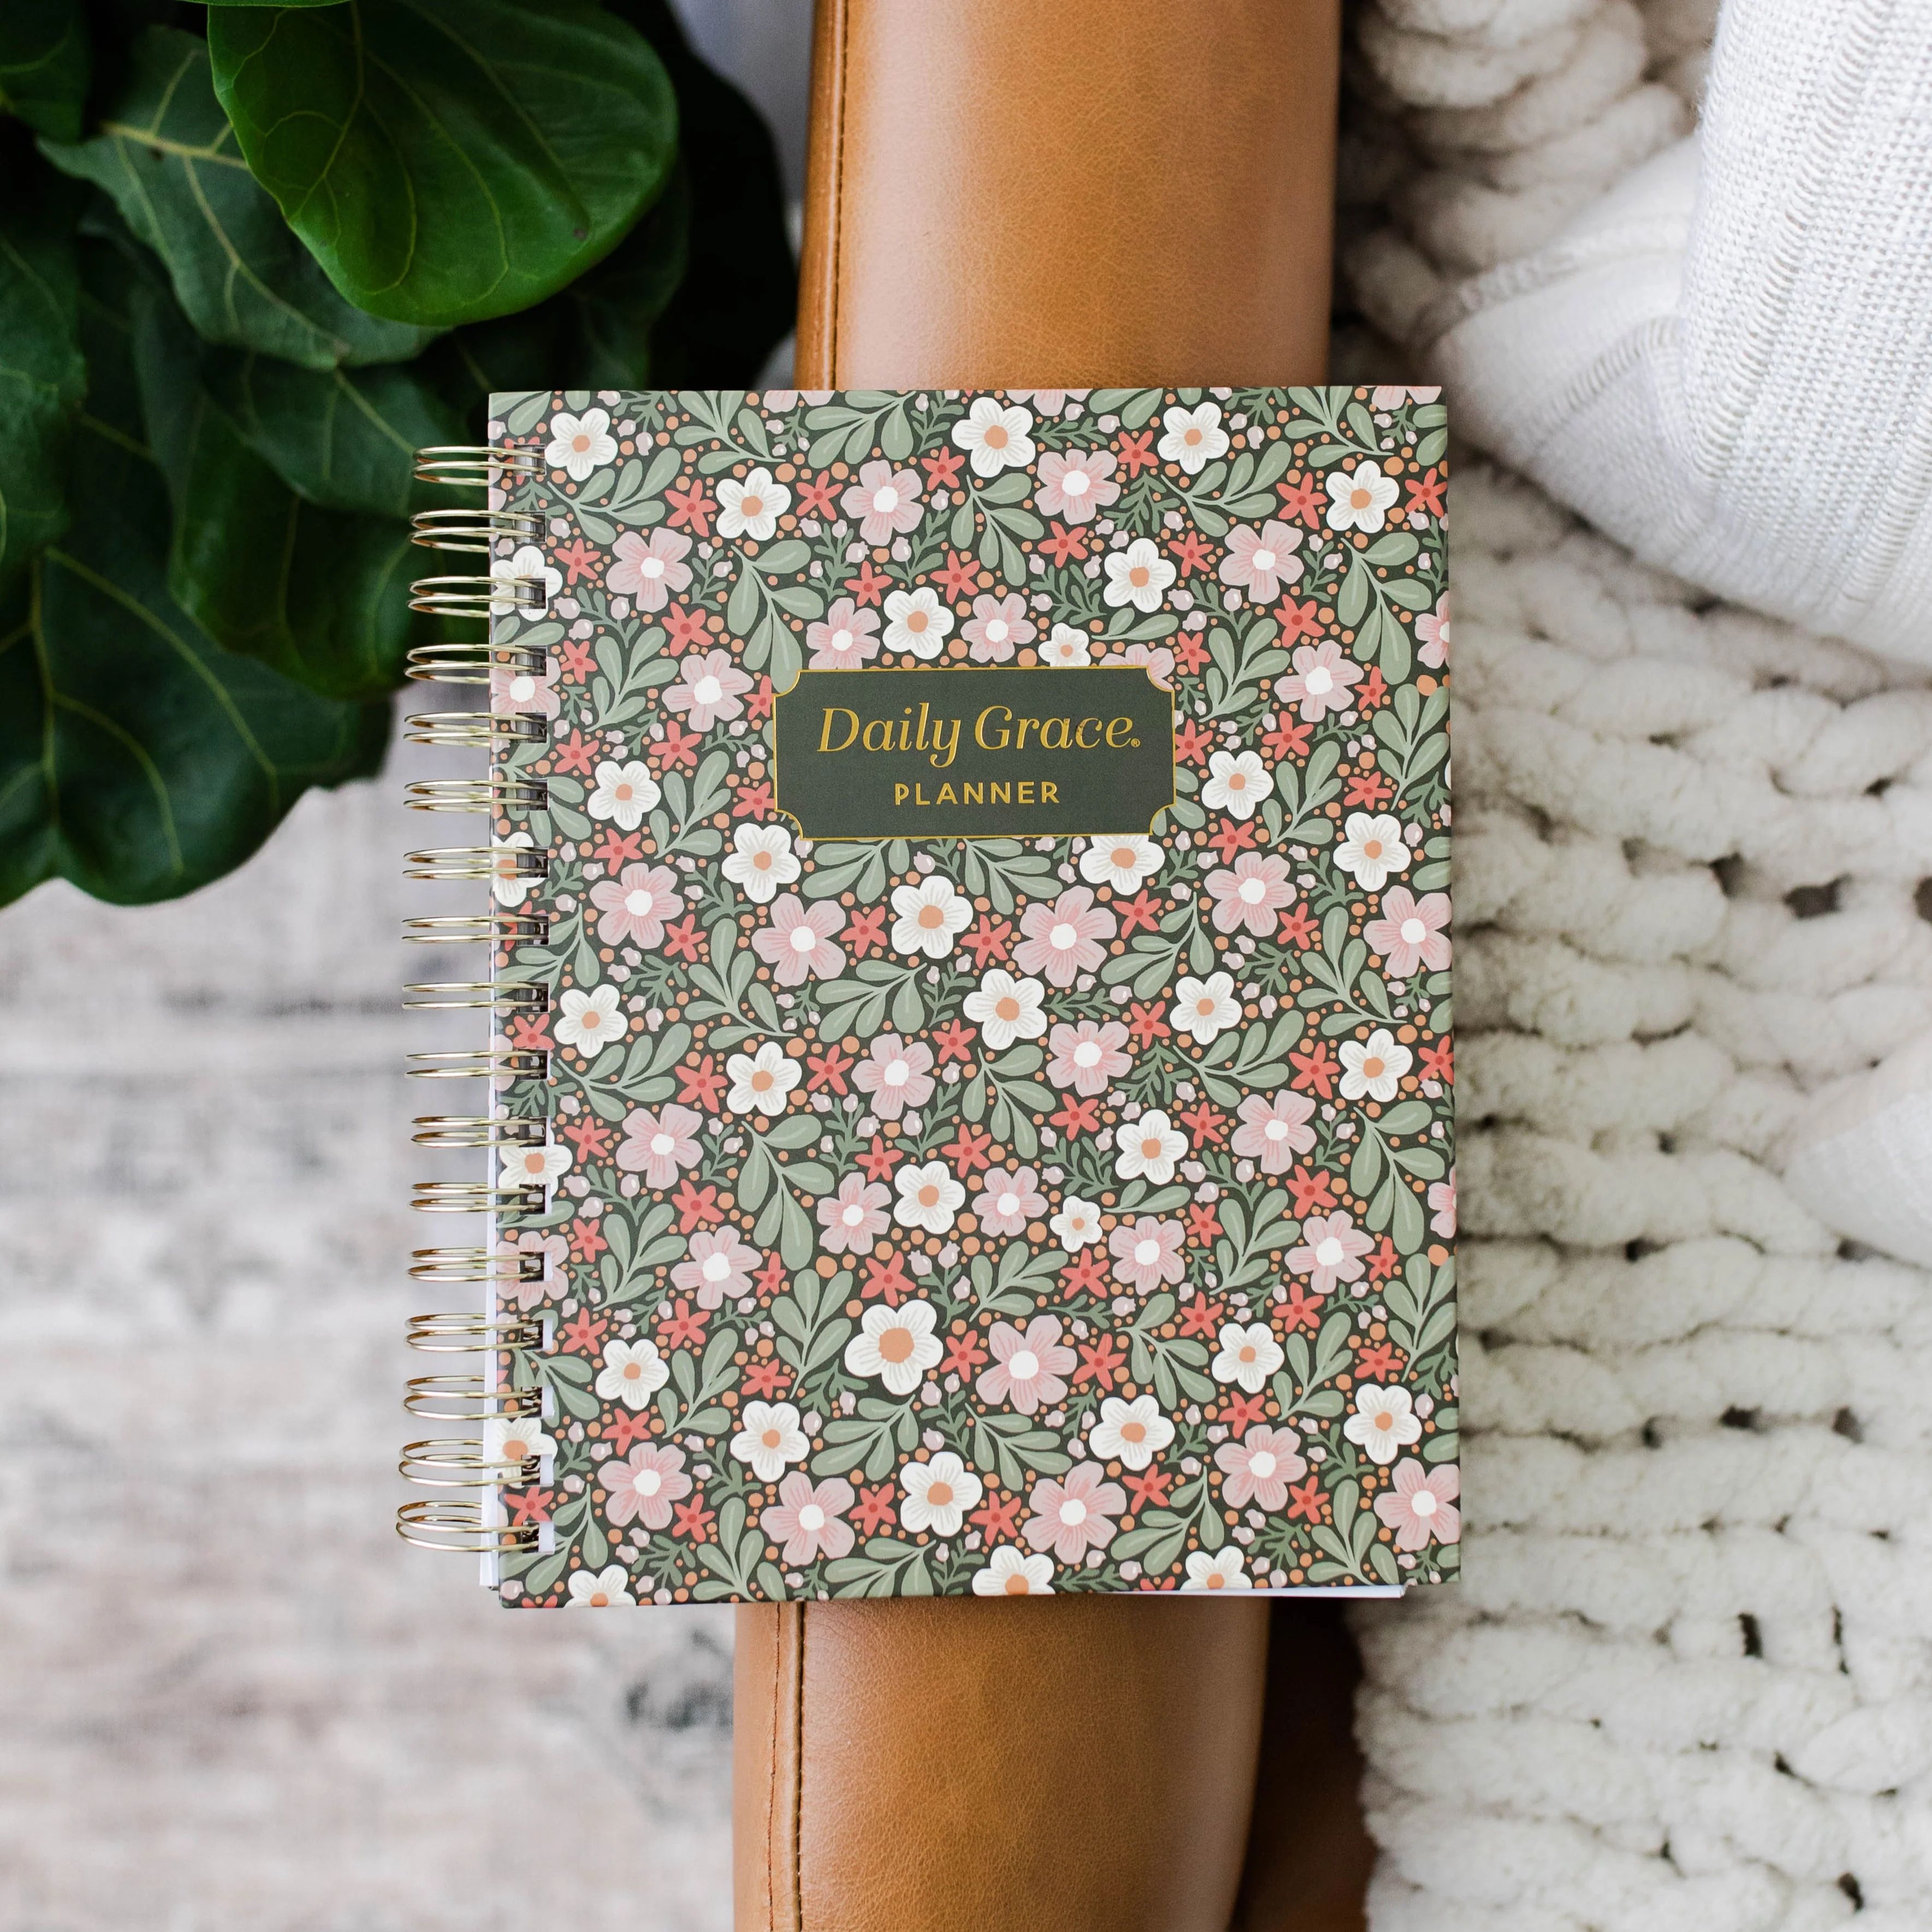 Daily Grace Planner - Almond Blossom Spiral | The Daily Grace Co.